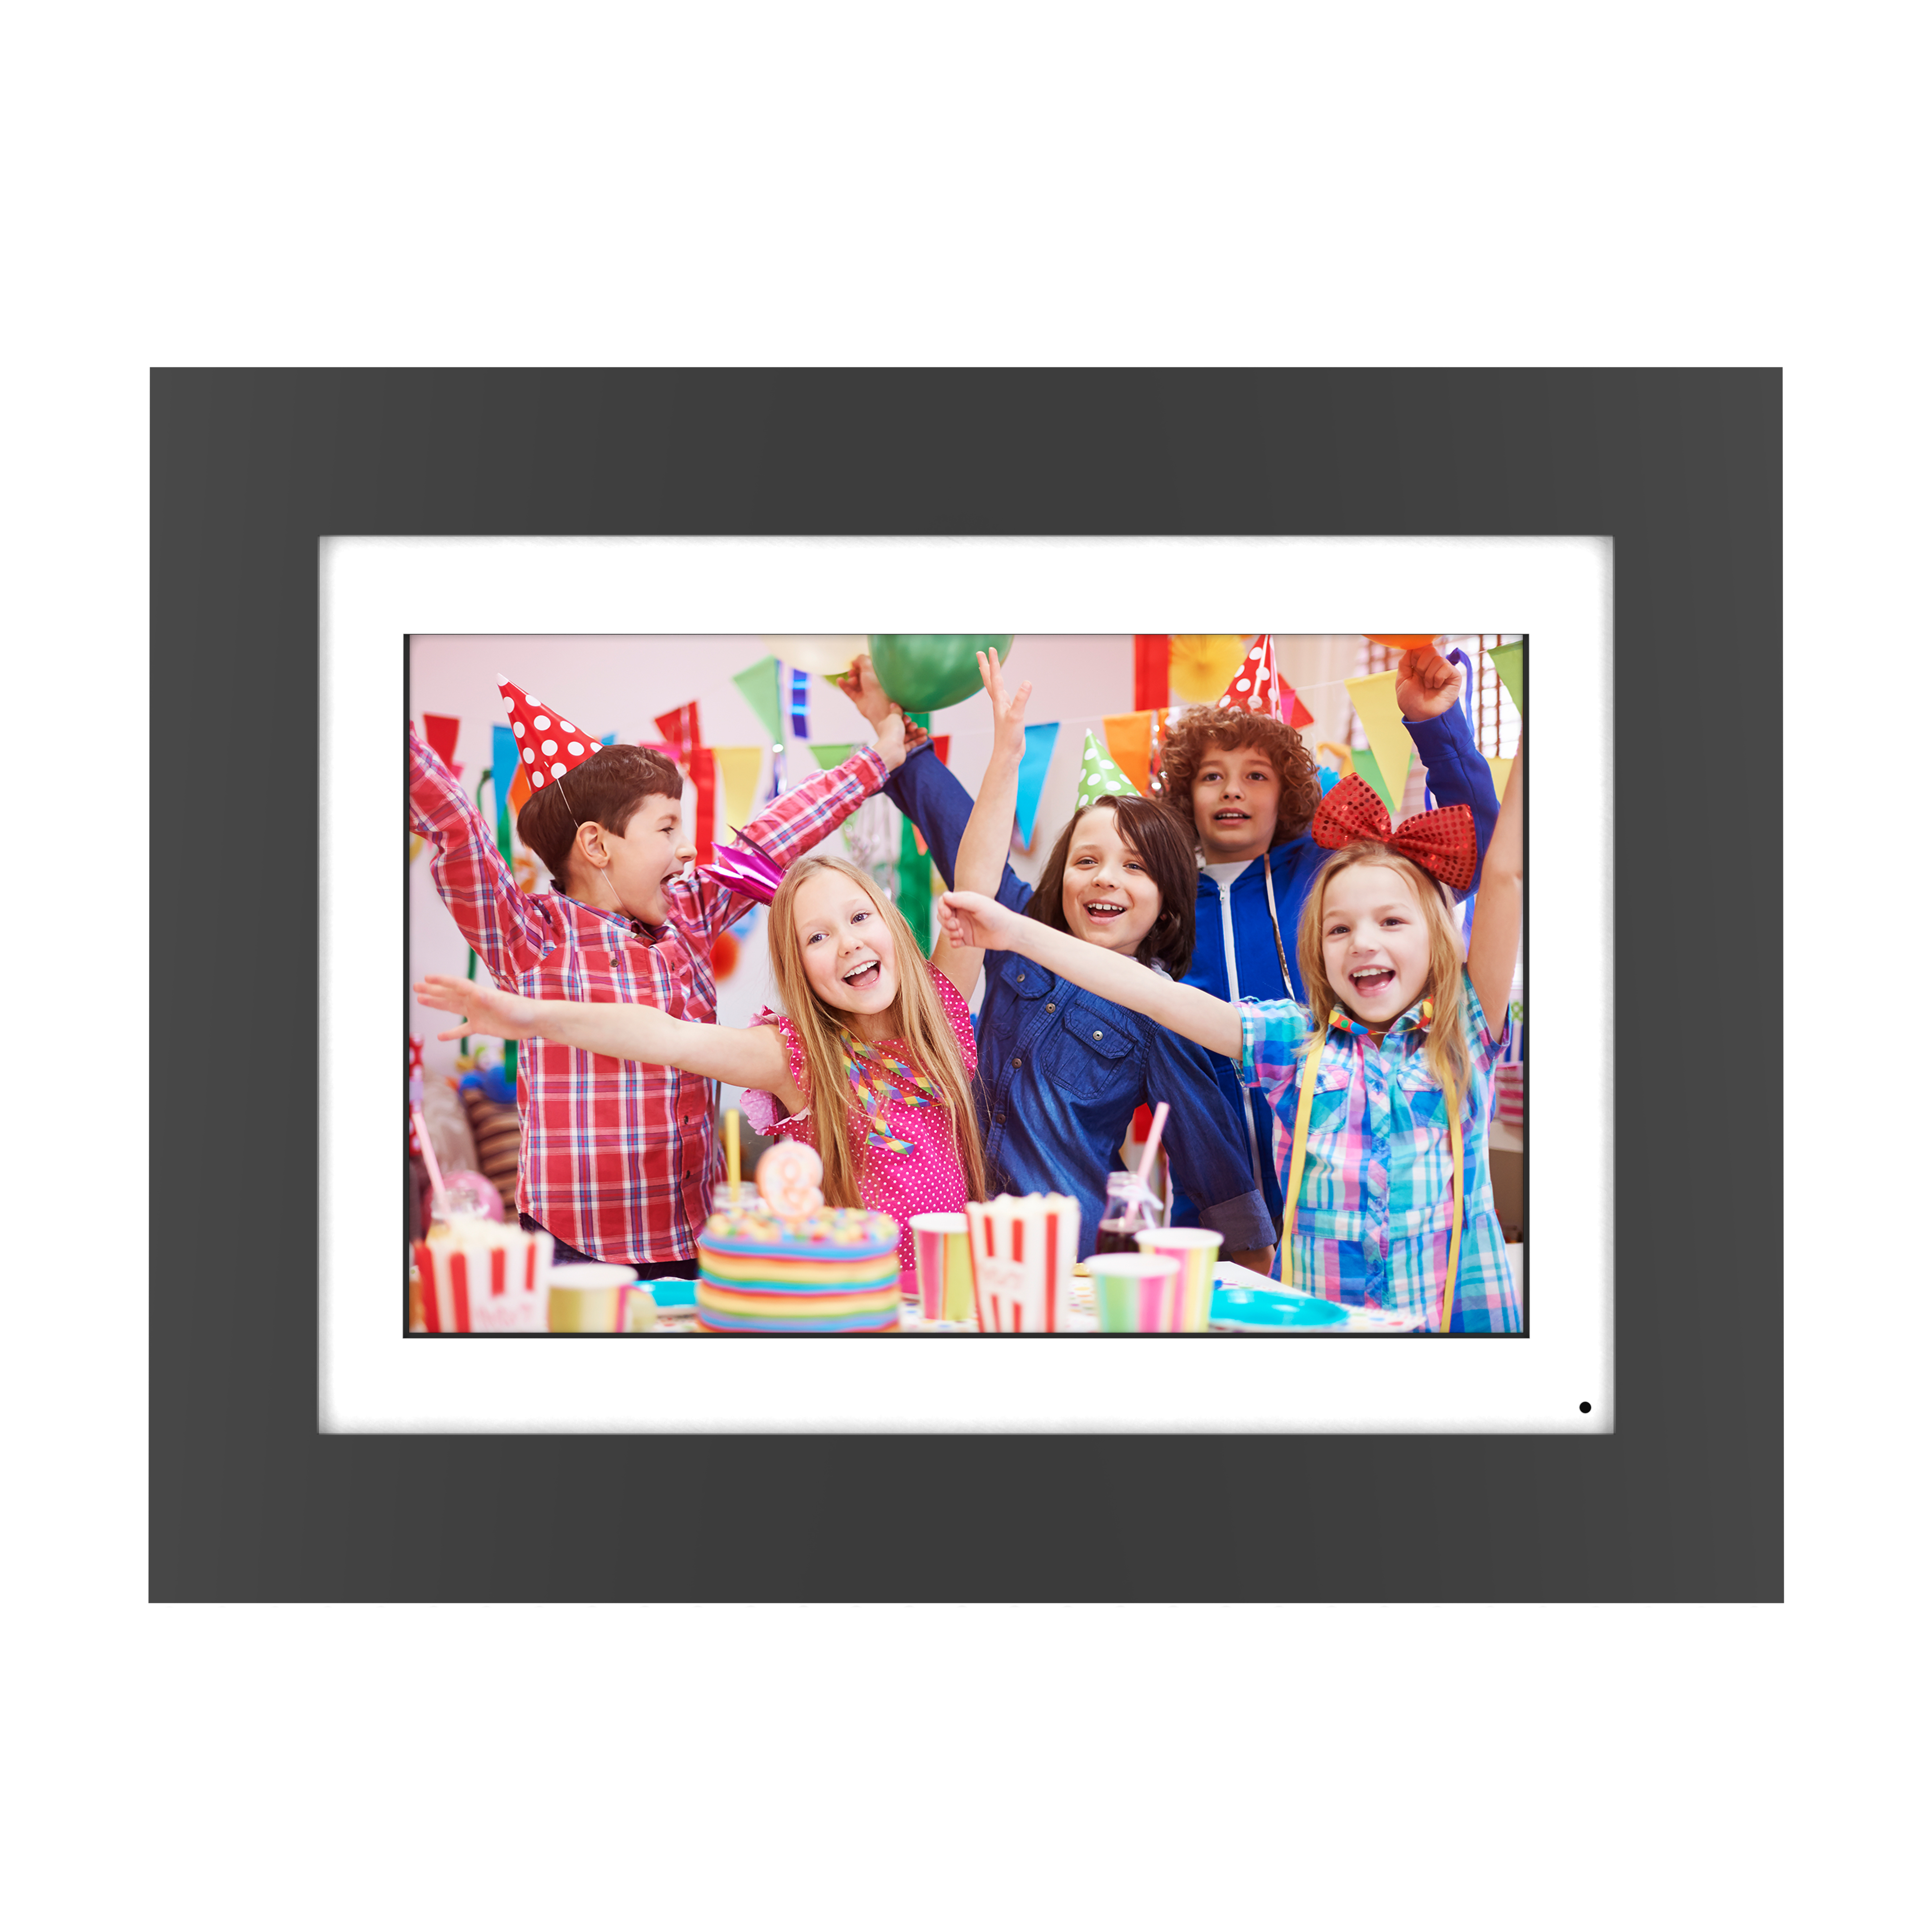 1st Gen. Simplysmart Home Friends And Family 10.1” Wi-Fi Smart Digital Picture Frame, Send Pictures From Phone To Frame, Hd 1080P Touchscreen, 8Gb Internal Memory - image 1 of 5